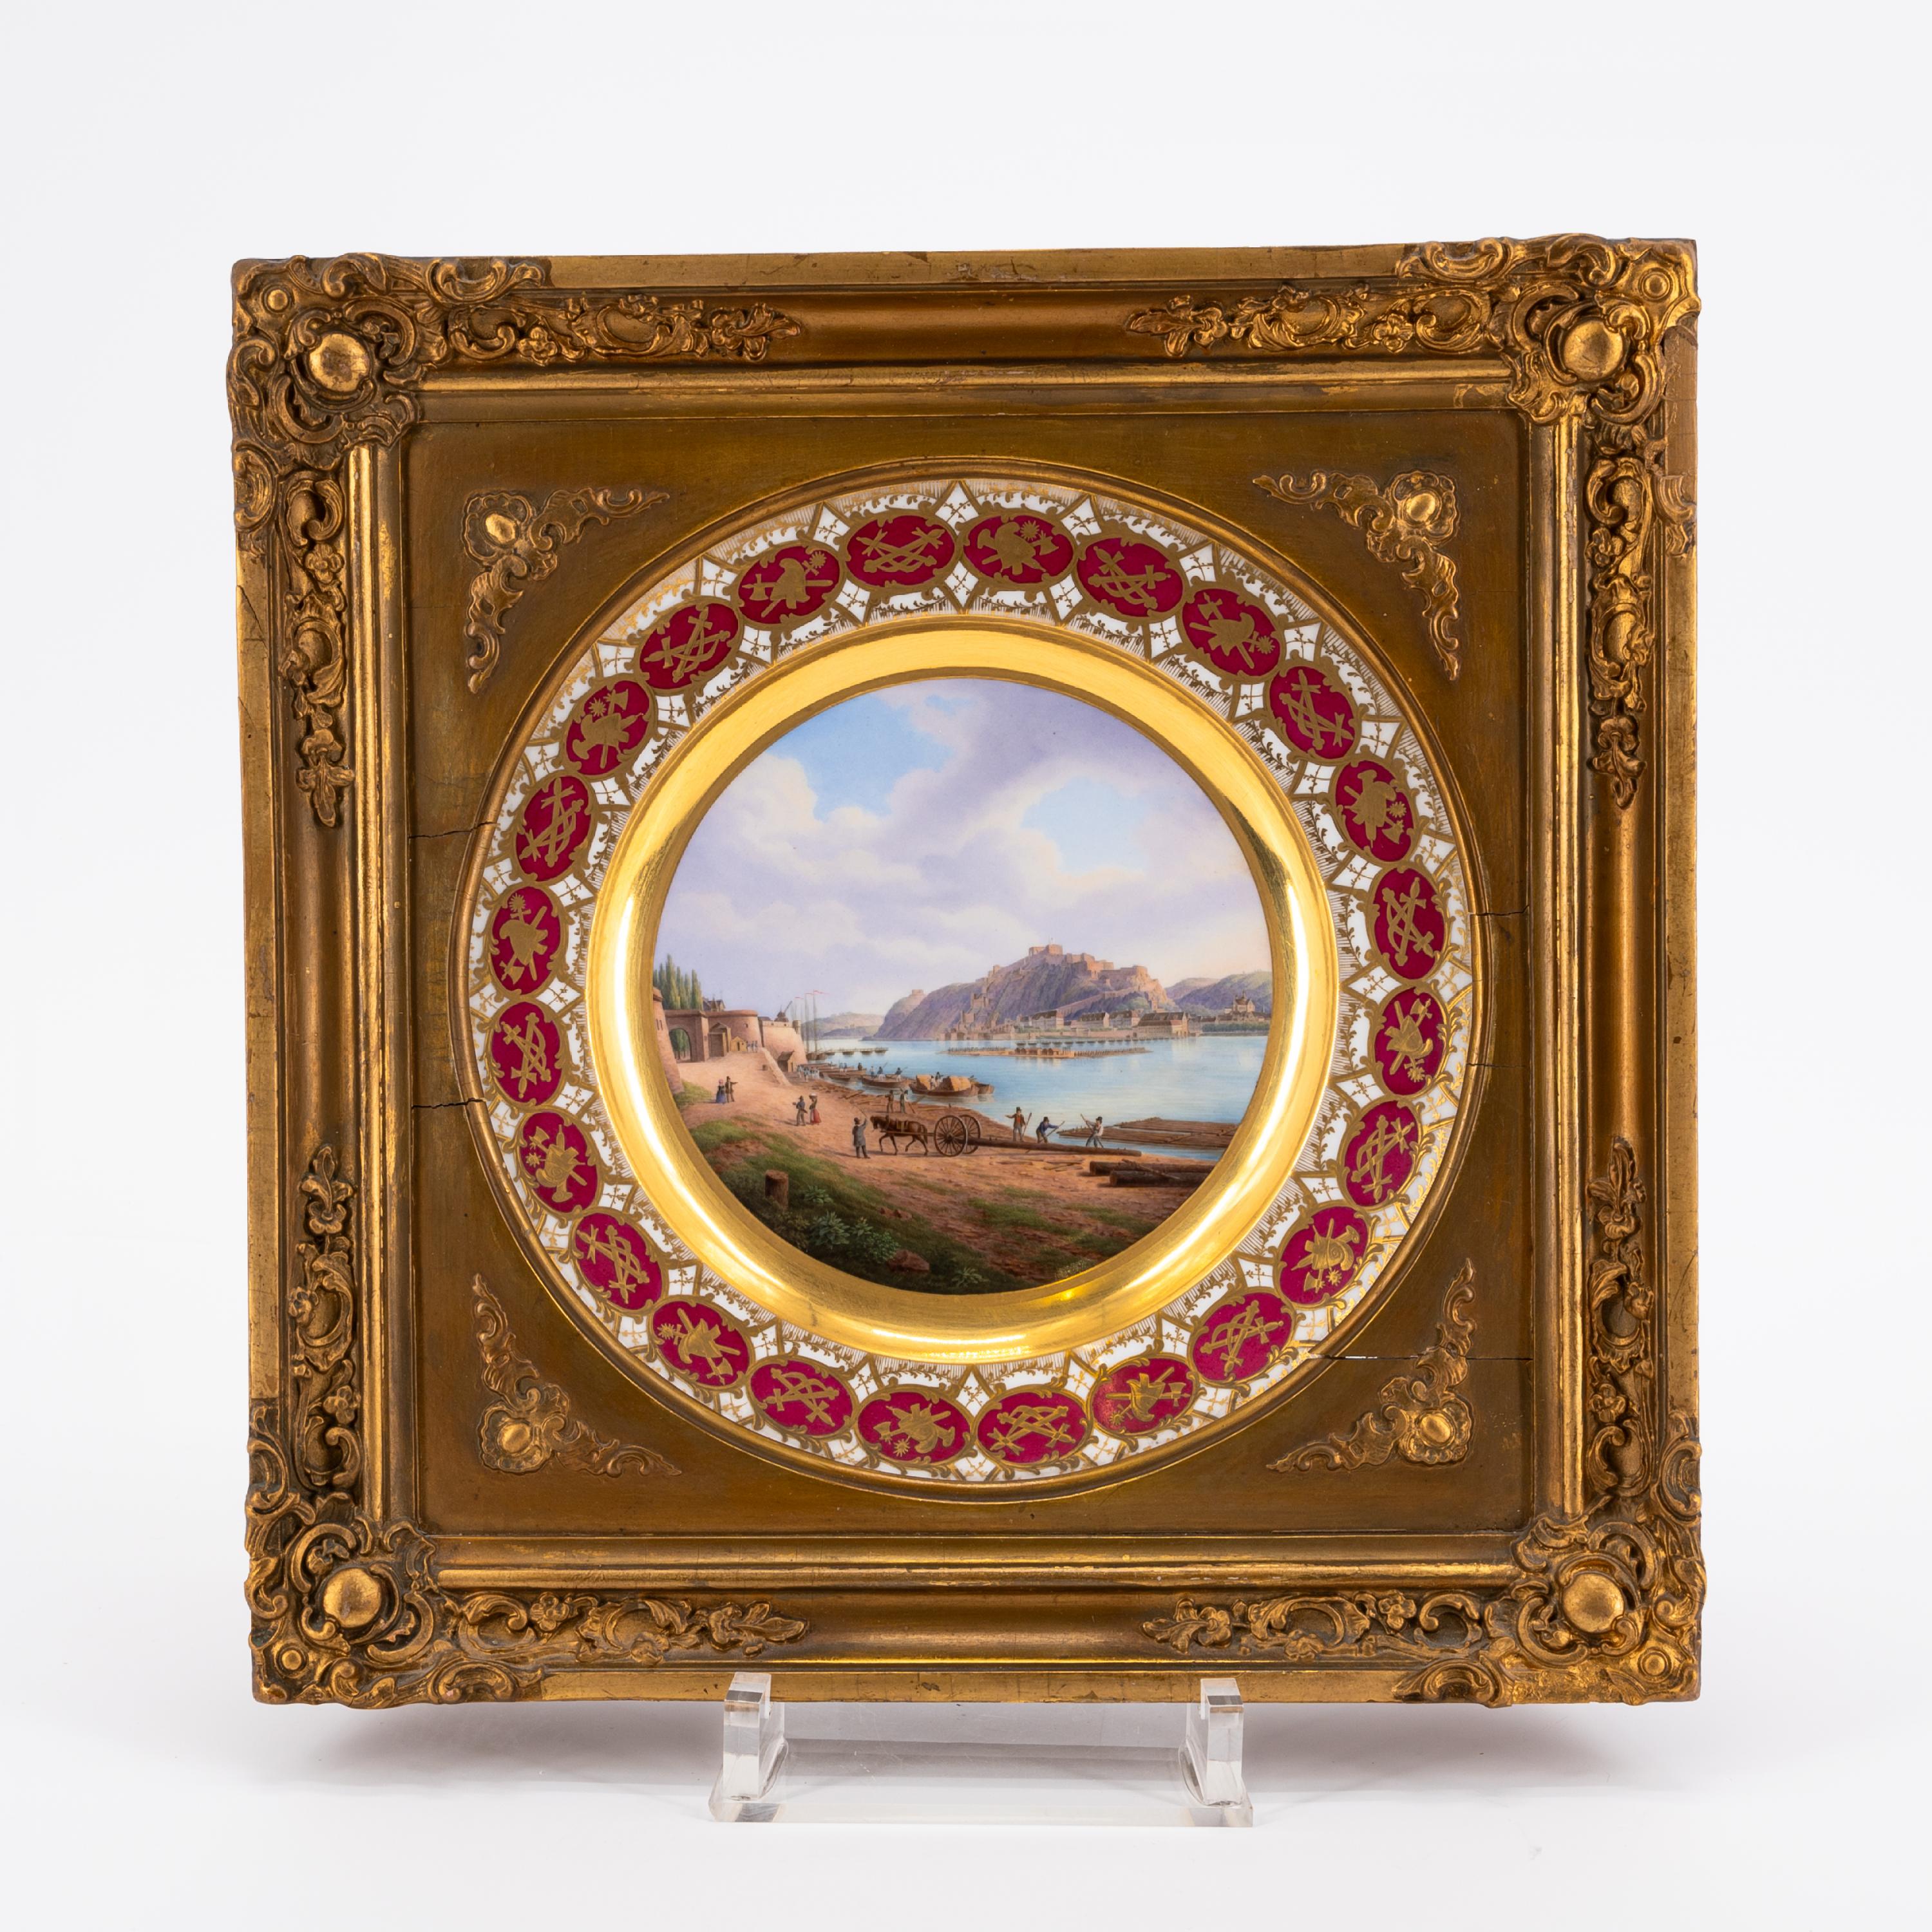 EXEPTIONAL SERIES OF TWELVE PORCELAIN PLATES WITH ROMANTIC VIEWS OF THE RHINE - Image 17 of 26